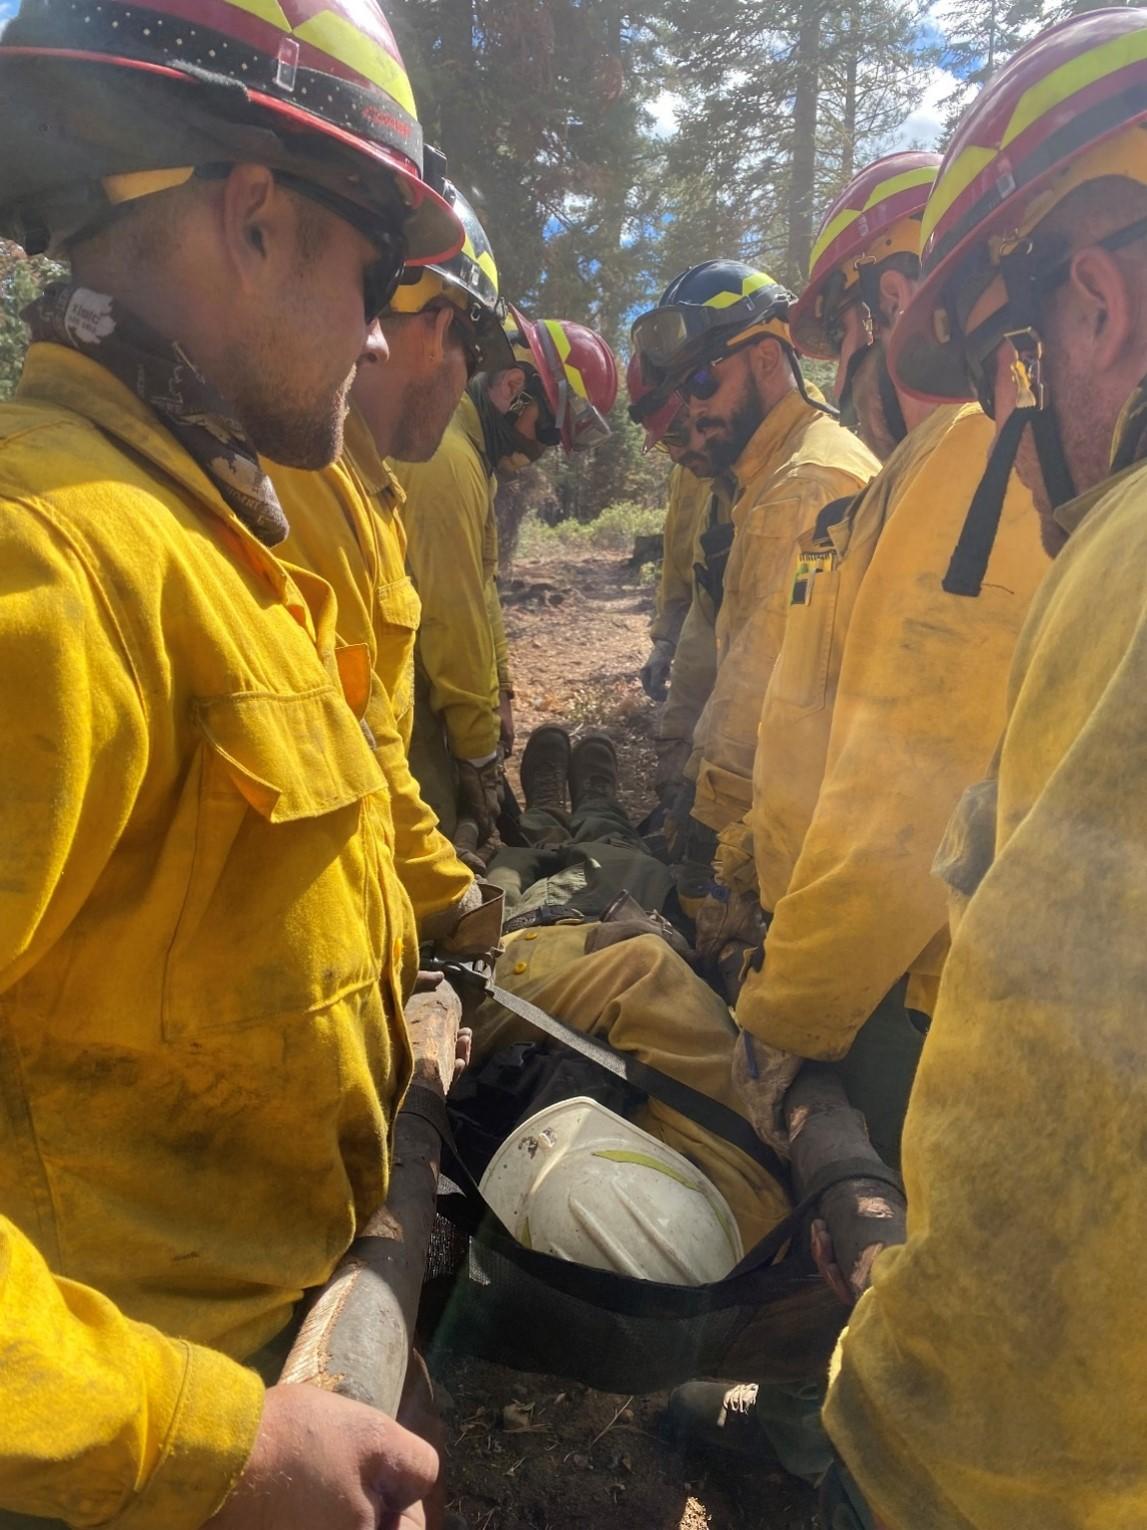   NorEast #1 practice a medical extraction during their break on the Dixie Fire, California. Photo: B. Mazzei, MassWildlife